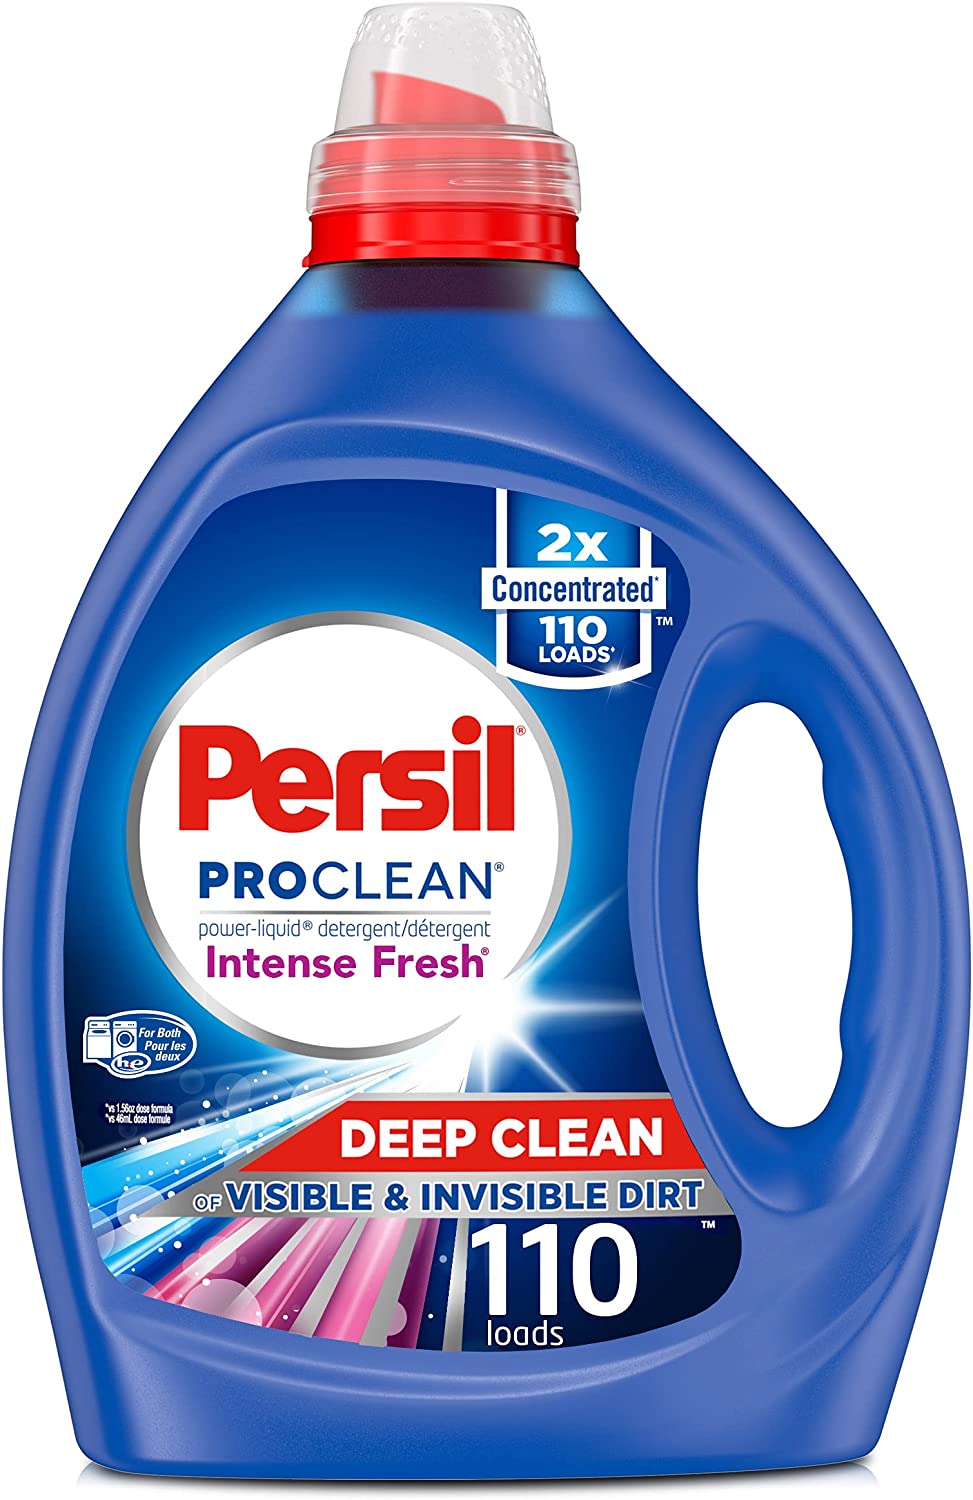 Persil ProClean Stain Removing Laundry Detergent